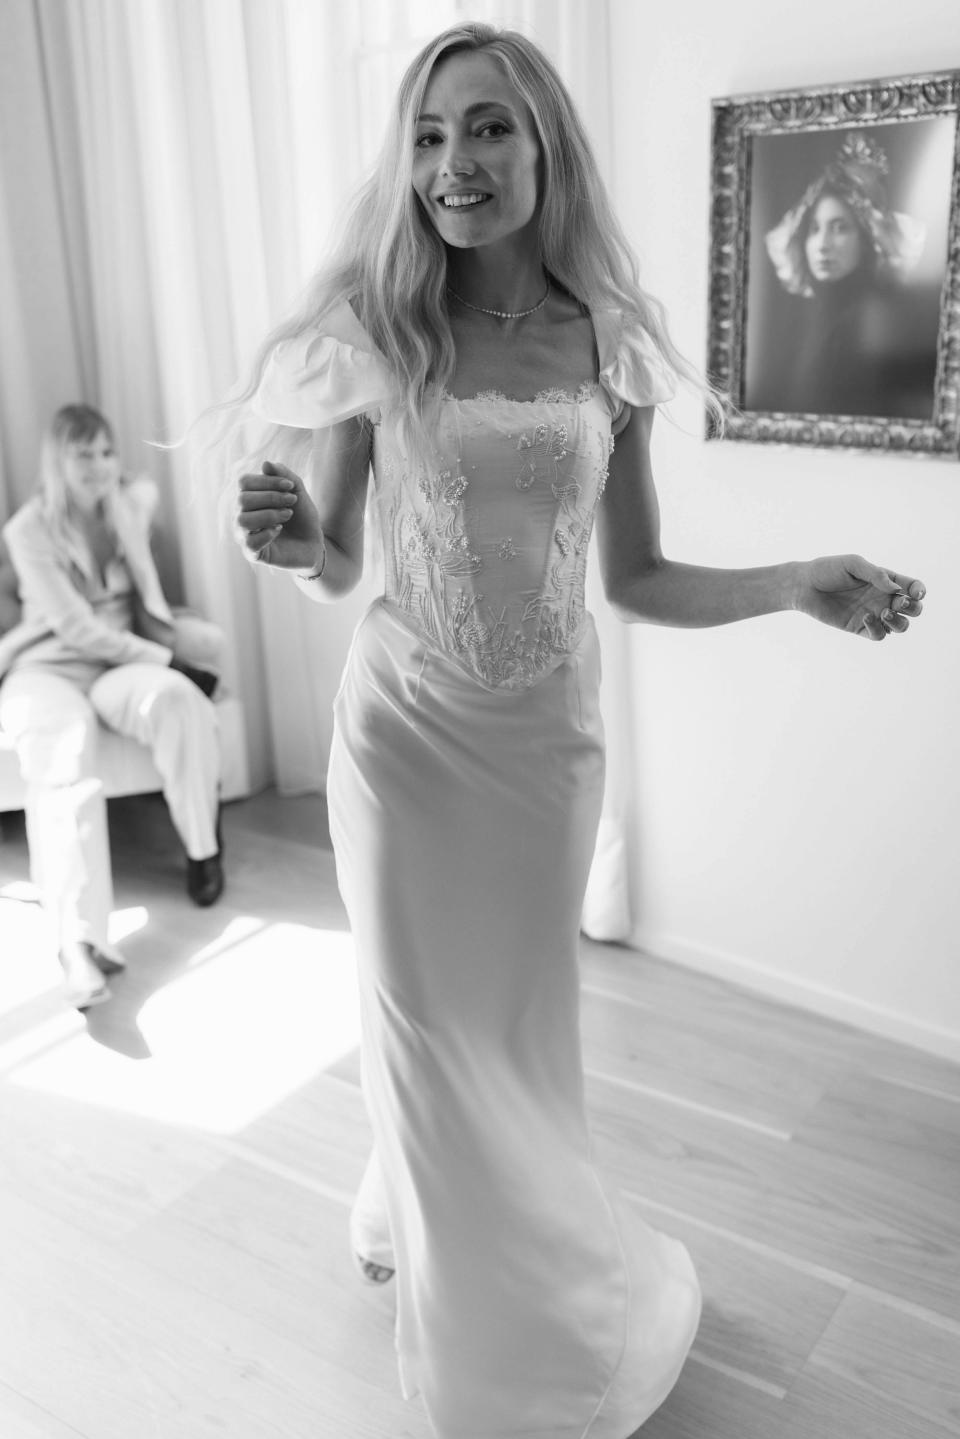 How Model Clara Paget Realized Her Dream Wedding Dress From a Napkin Sketch